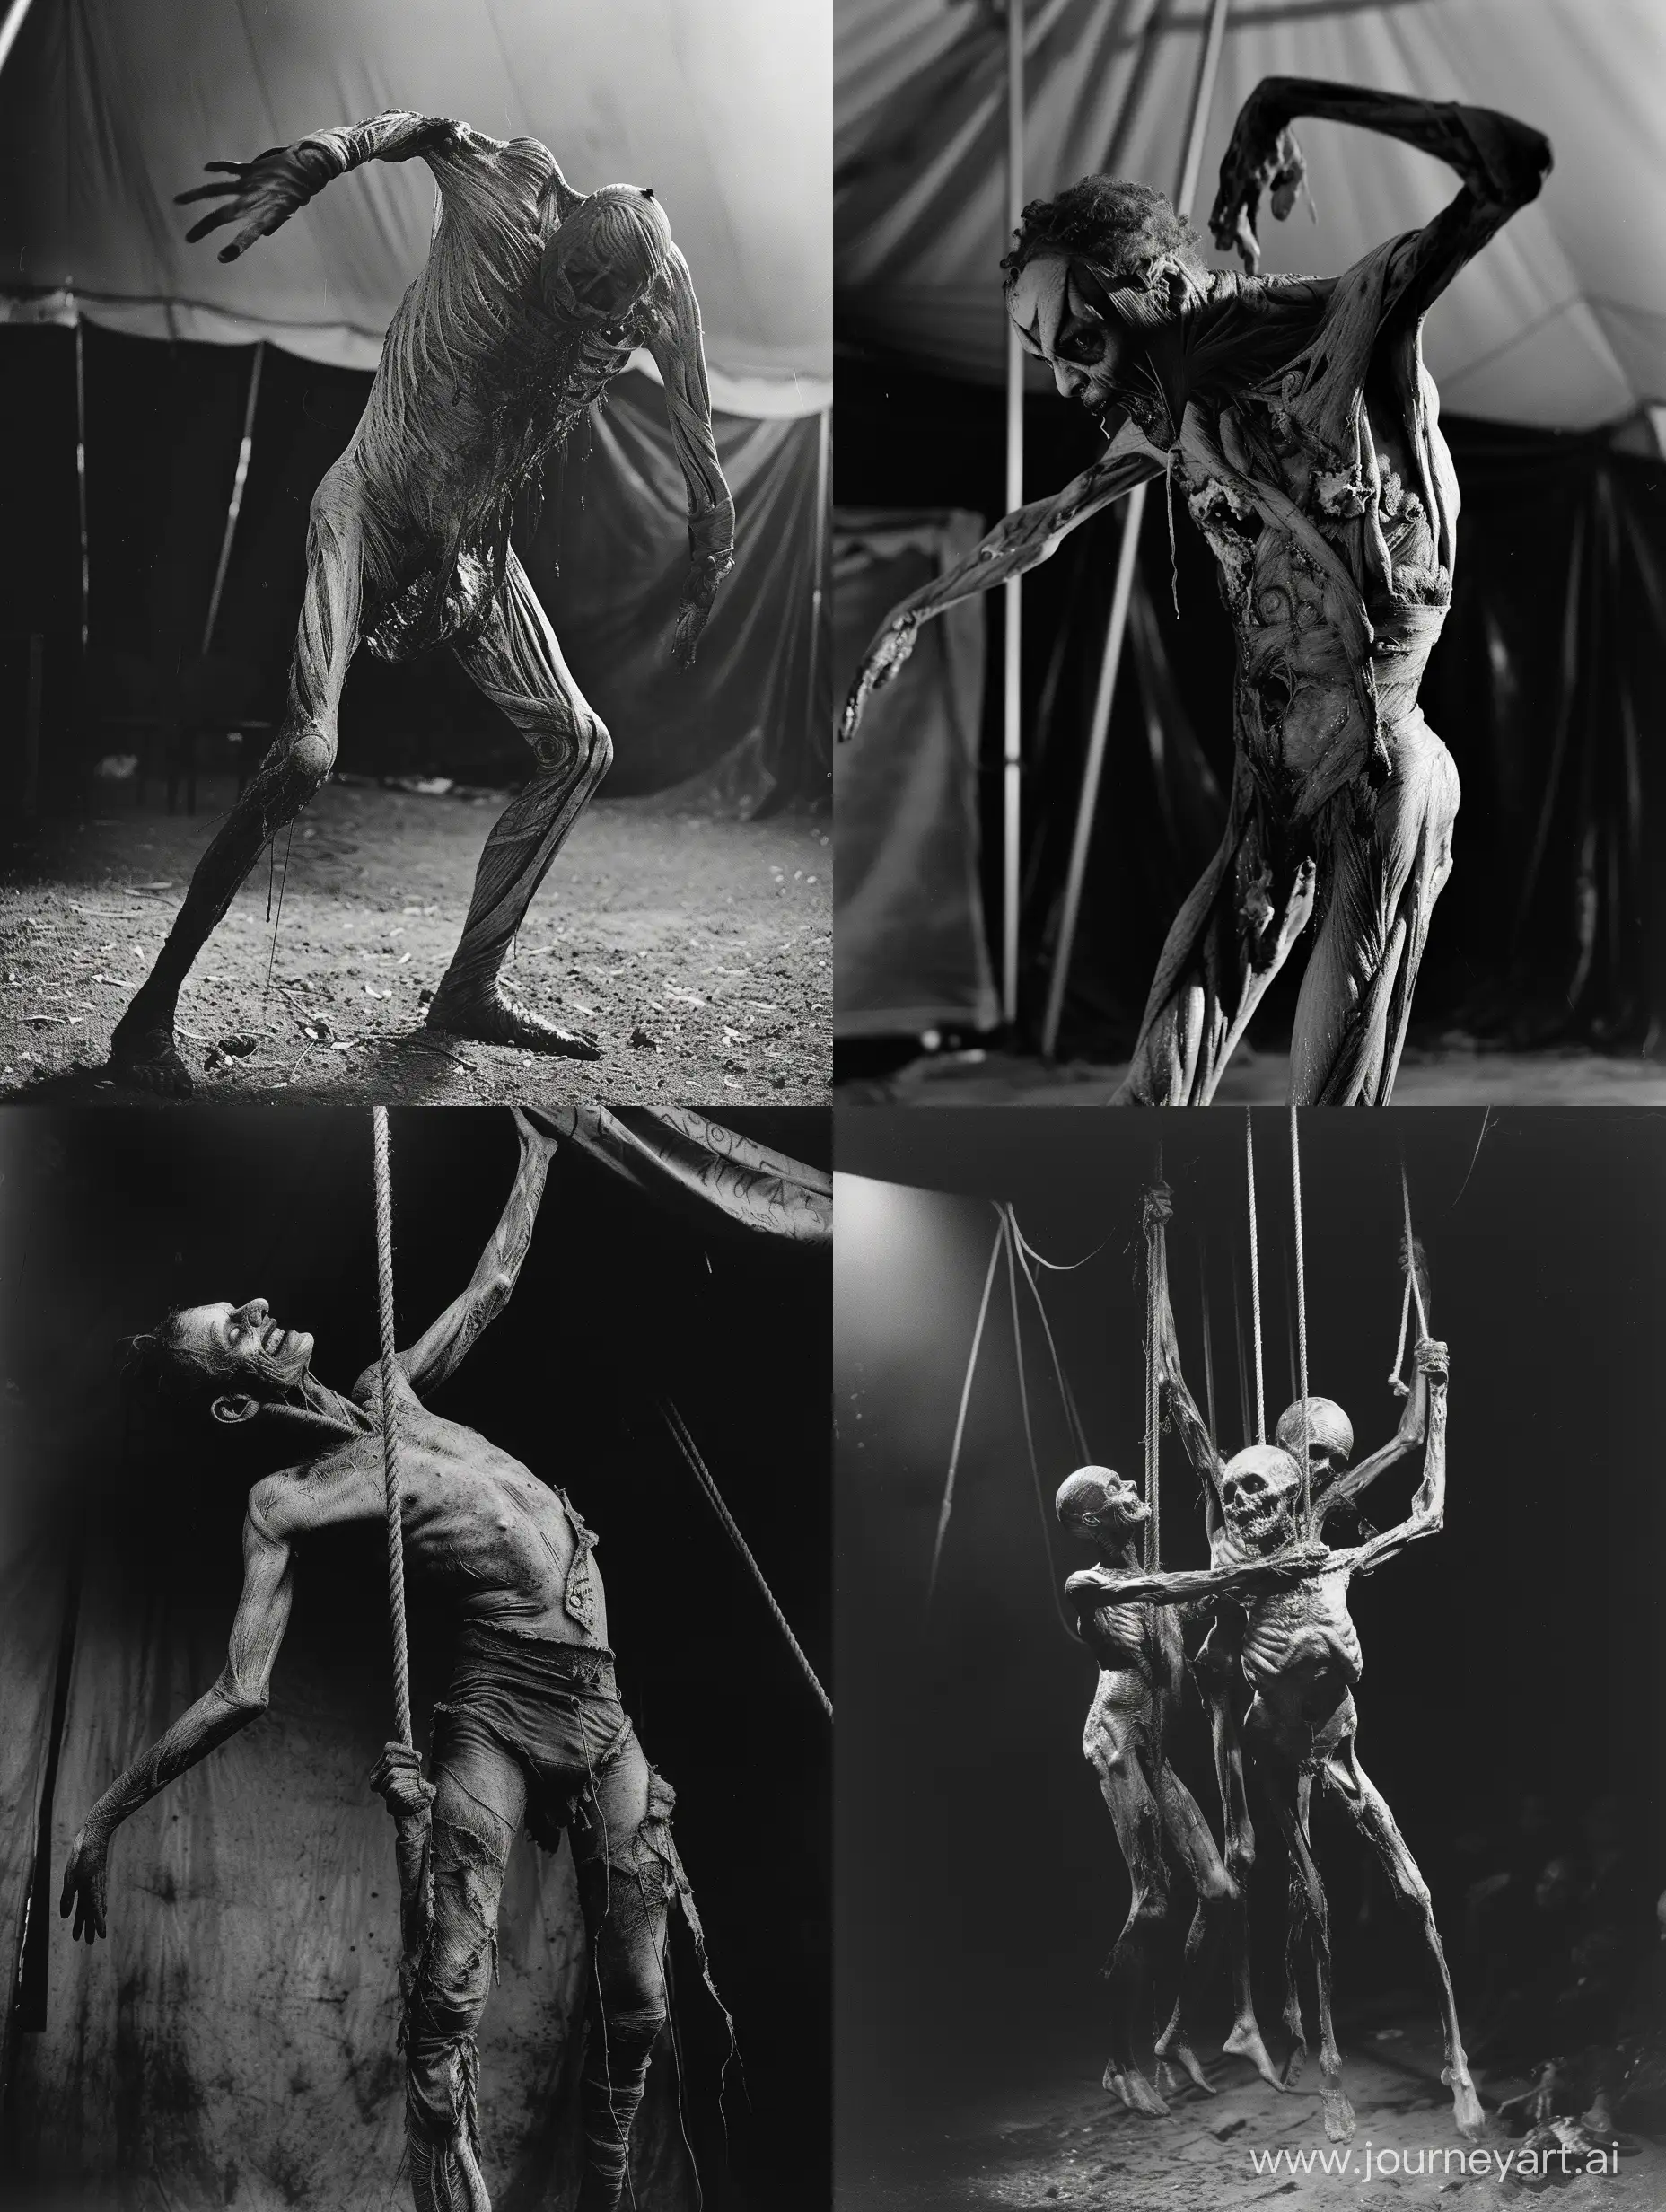 The Body Horror Circus: A sadistic carnival where grotesque performers showcase their contorted and grossly bodies shocking and horrifying the audience with their twisted physicality, grayscale, expired 35mm film, nightmare fuel